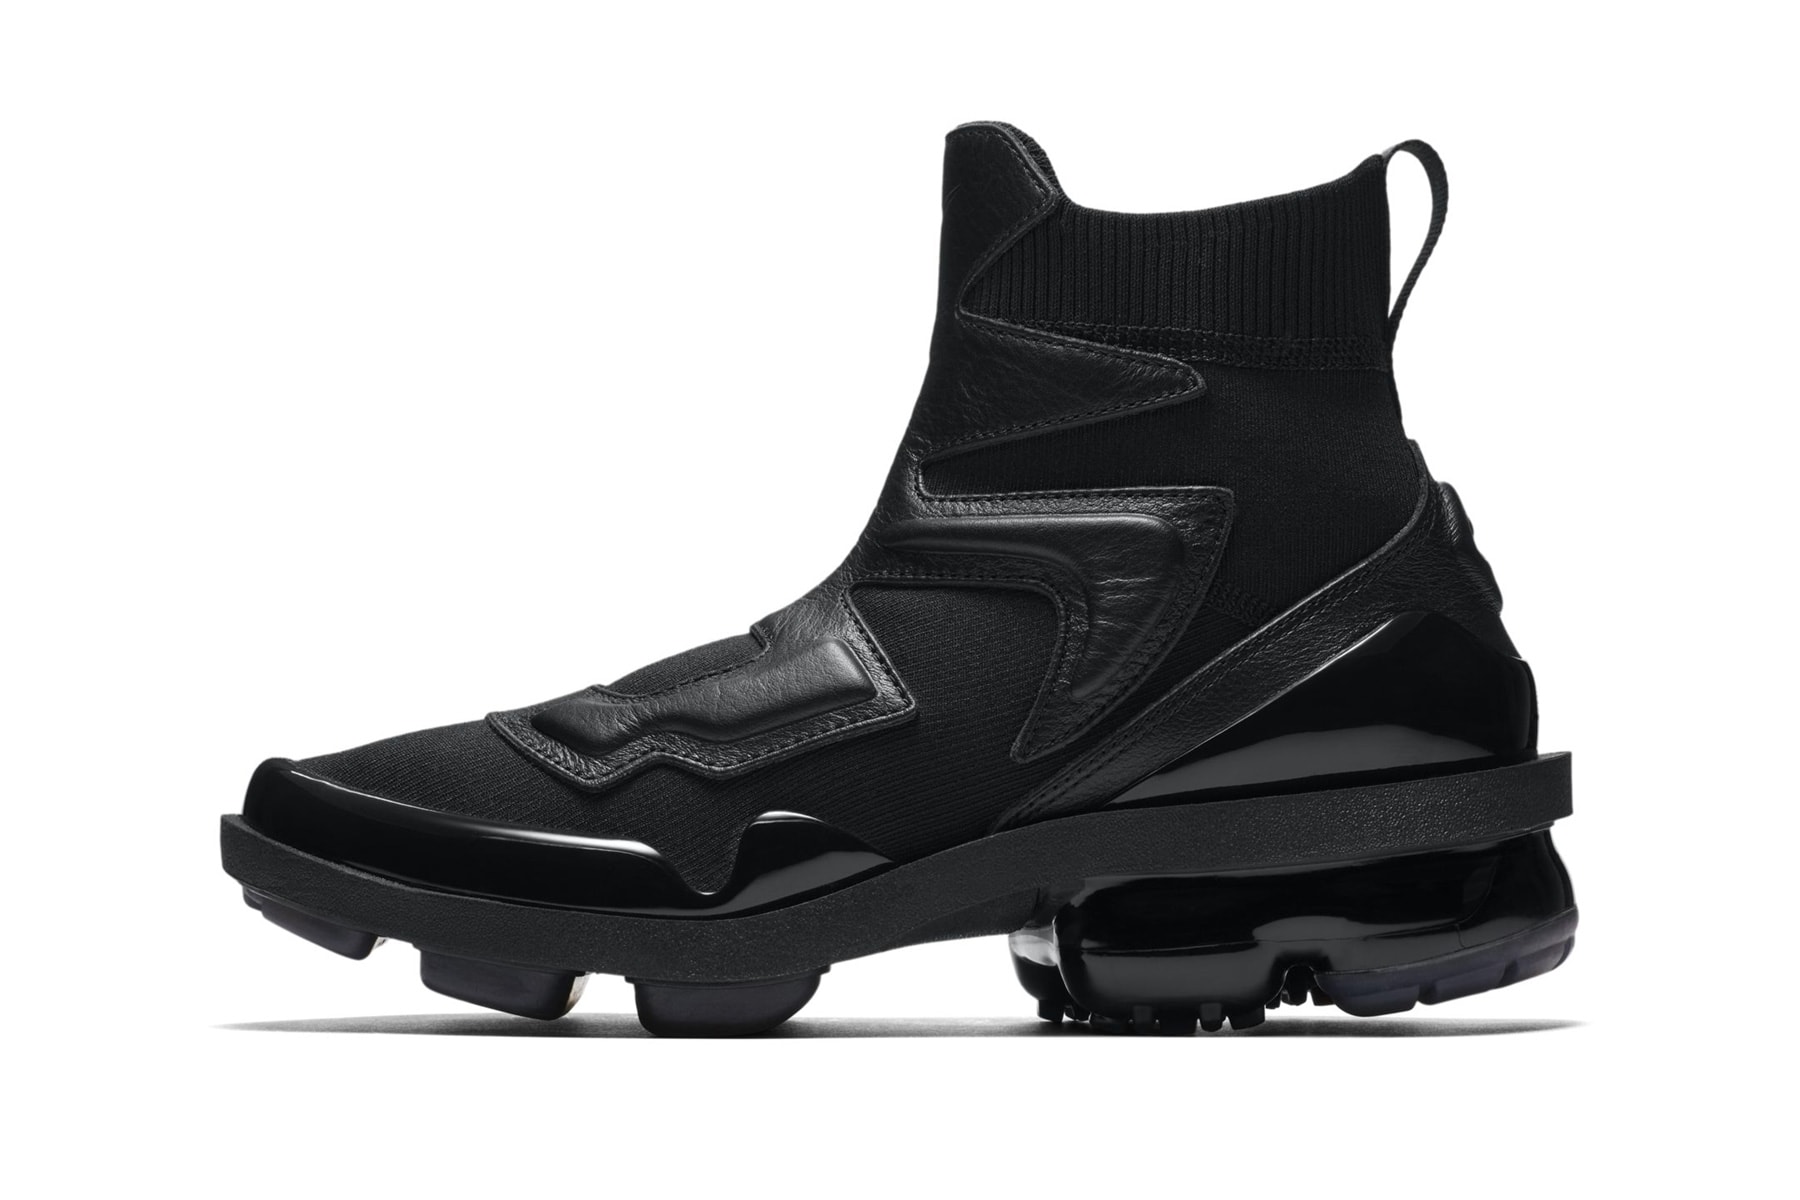 Nike Air VaporMax Light 2 "Black/White" "All-Black" colorway sneaker boot release date price 